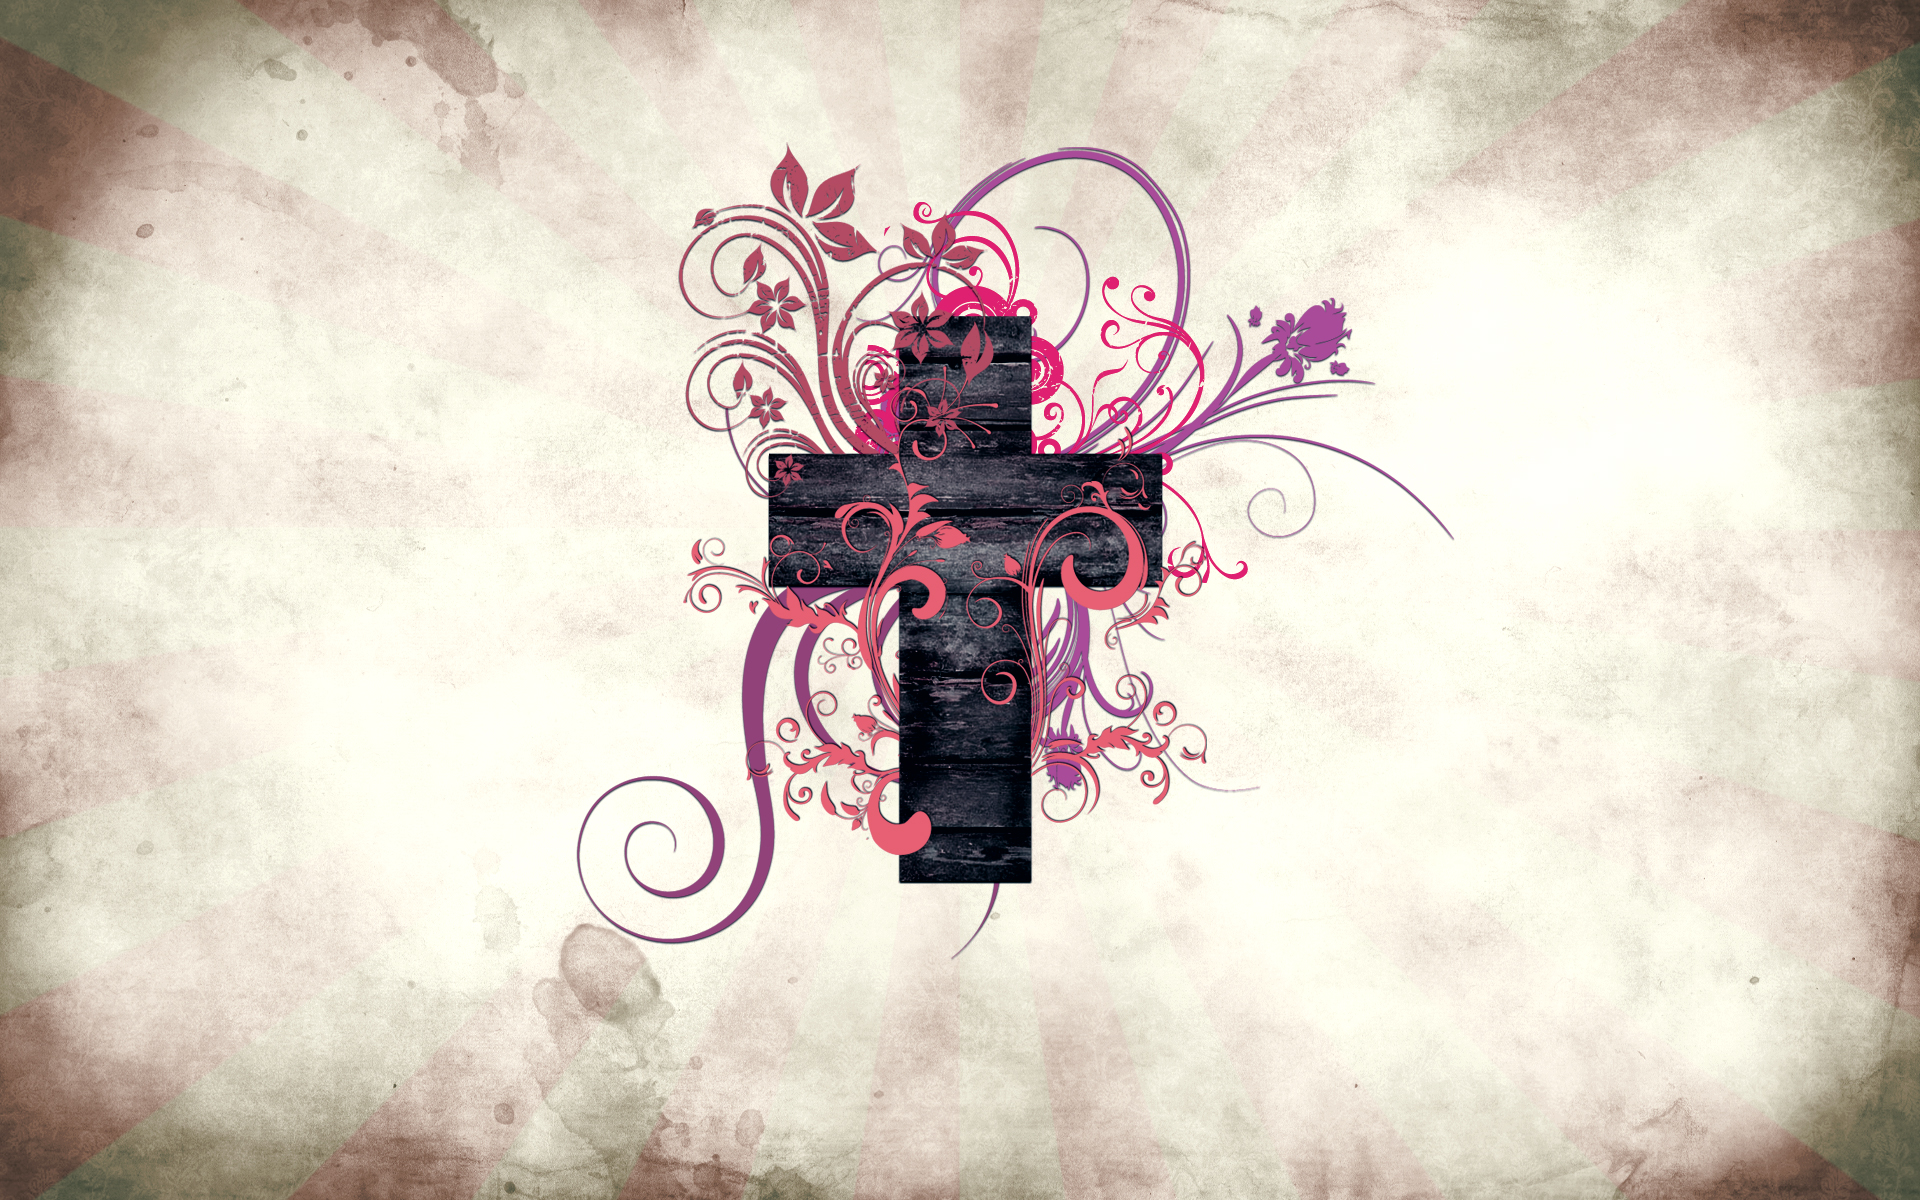 Abstract Cross Art Exclusive HD Wallpapers 1917